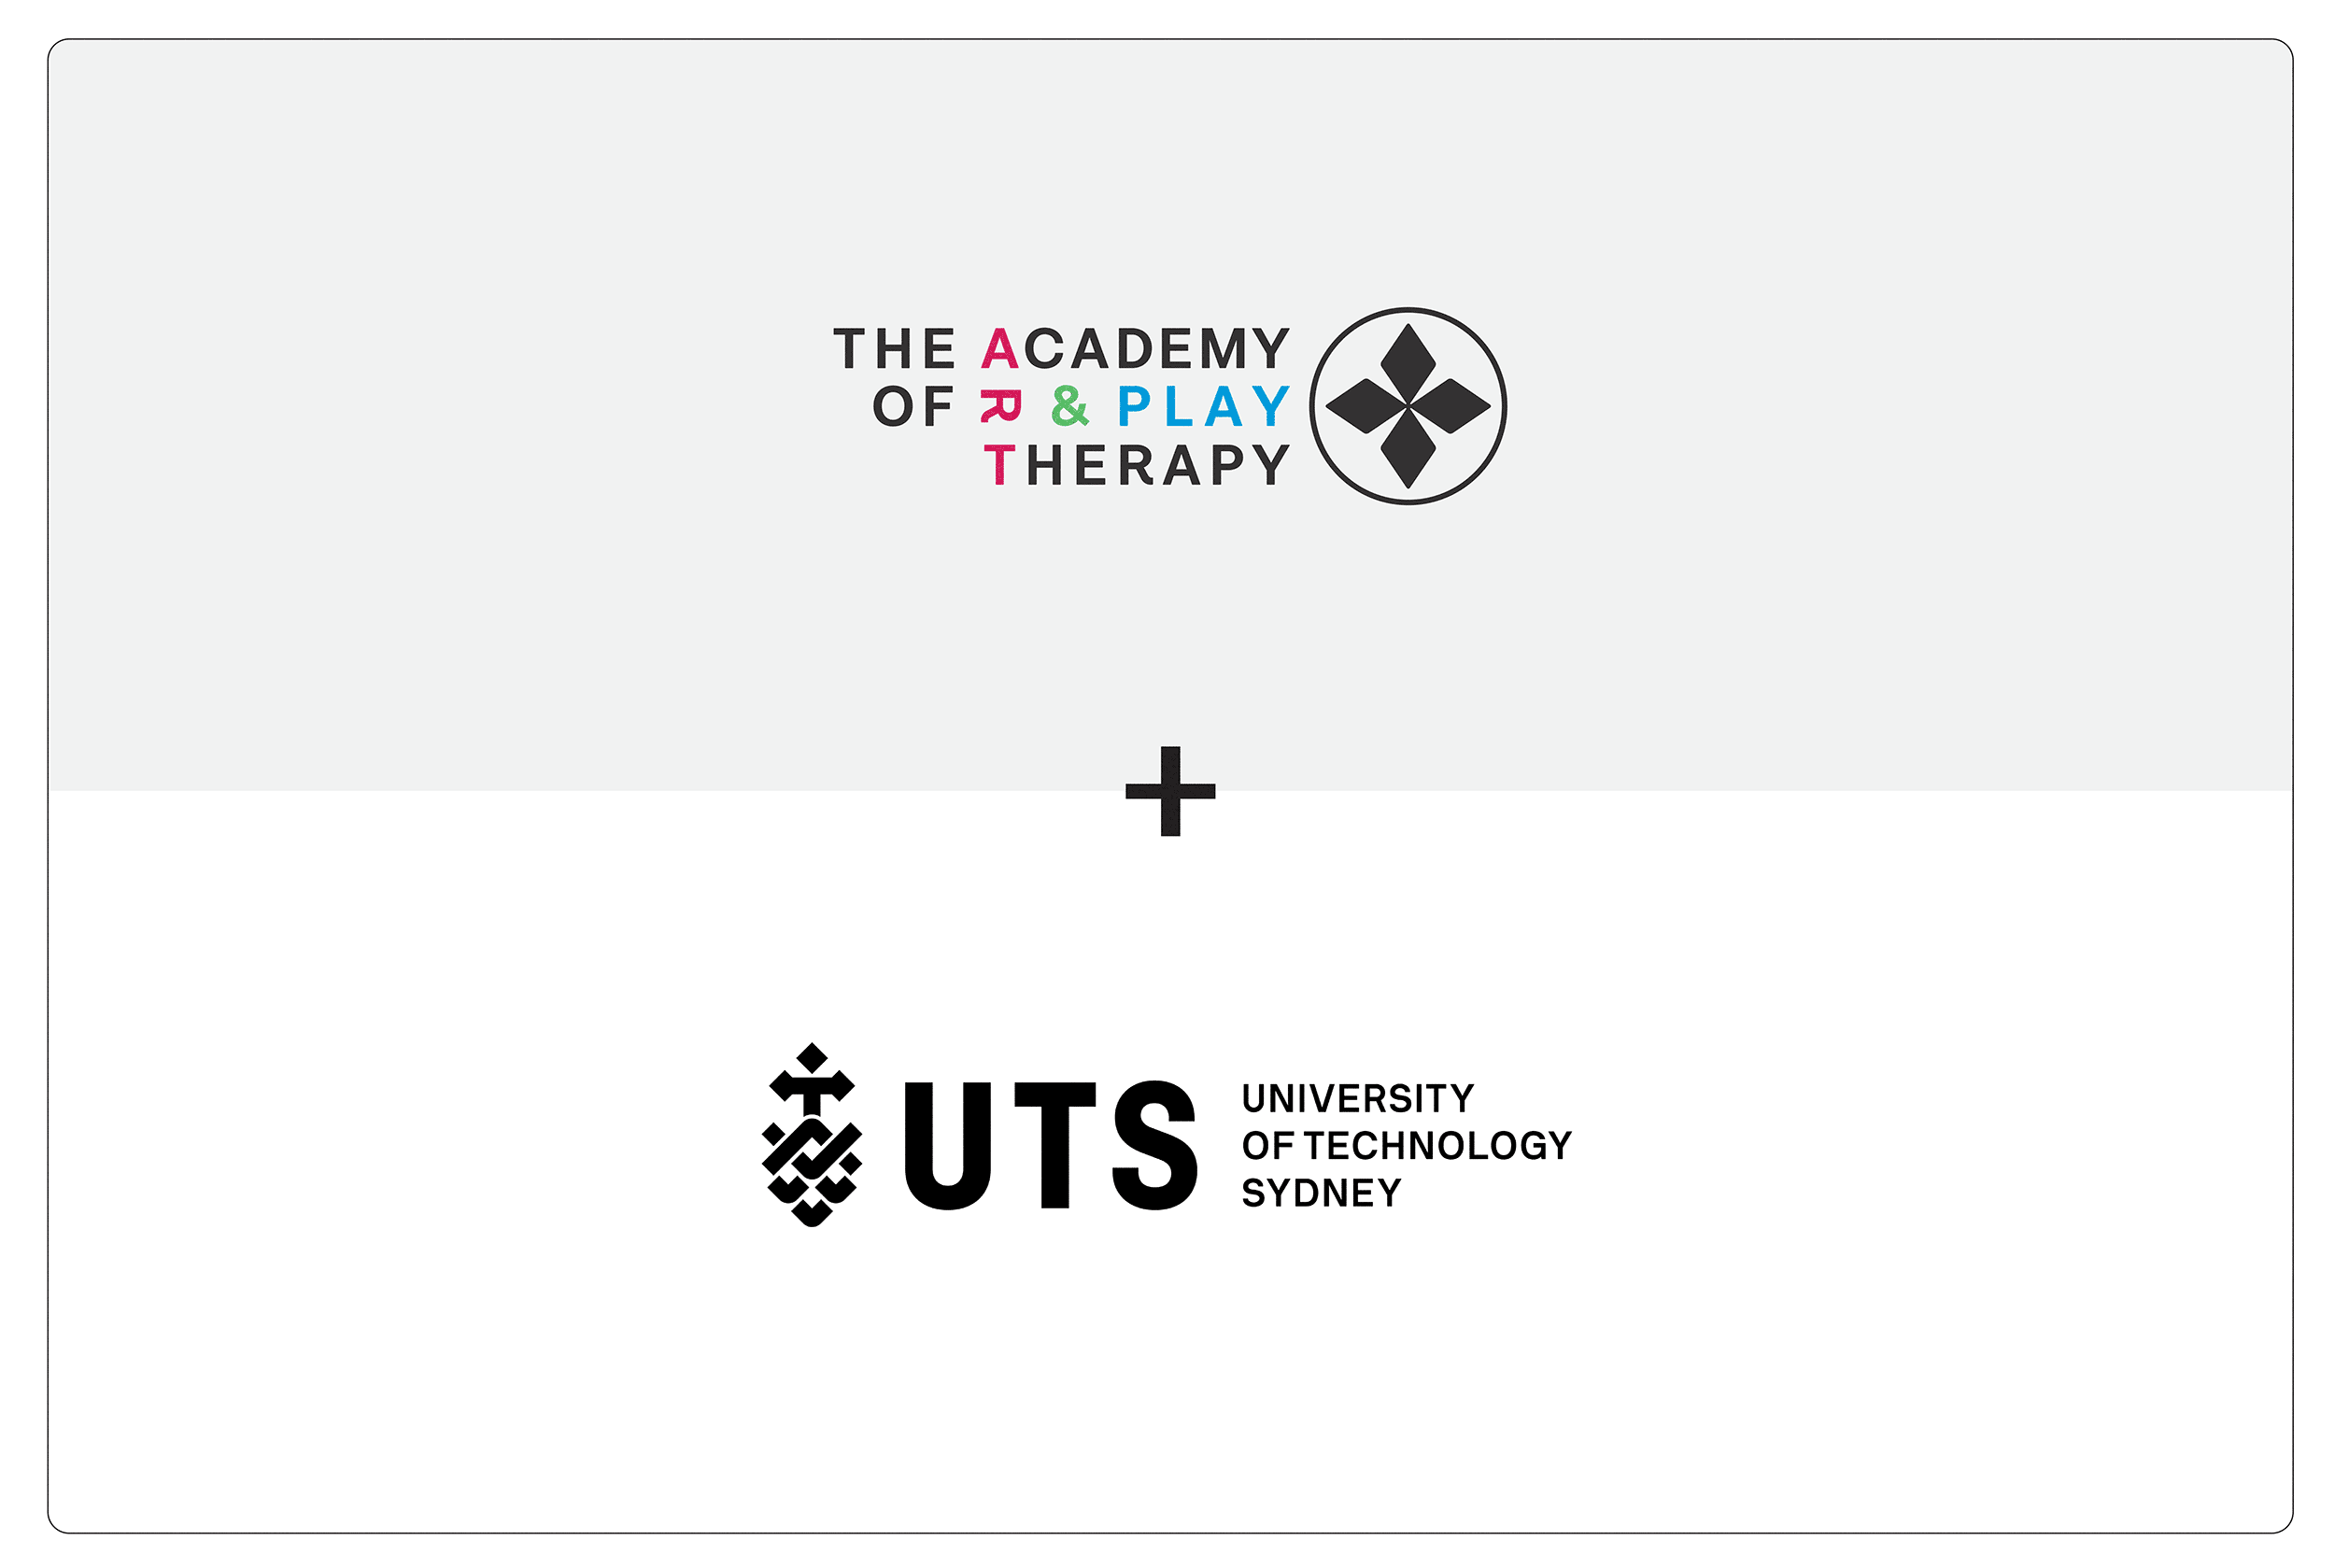 The Academy of Art & Play Therapy + UTS University of Technology Sydney logos